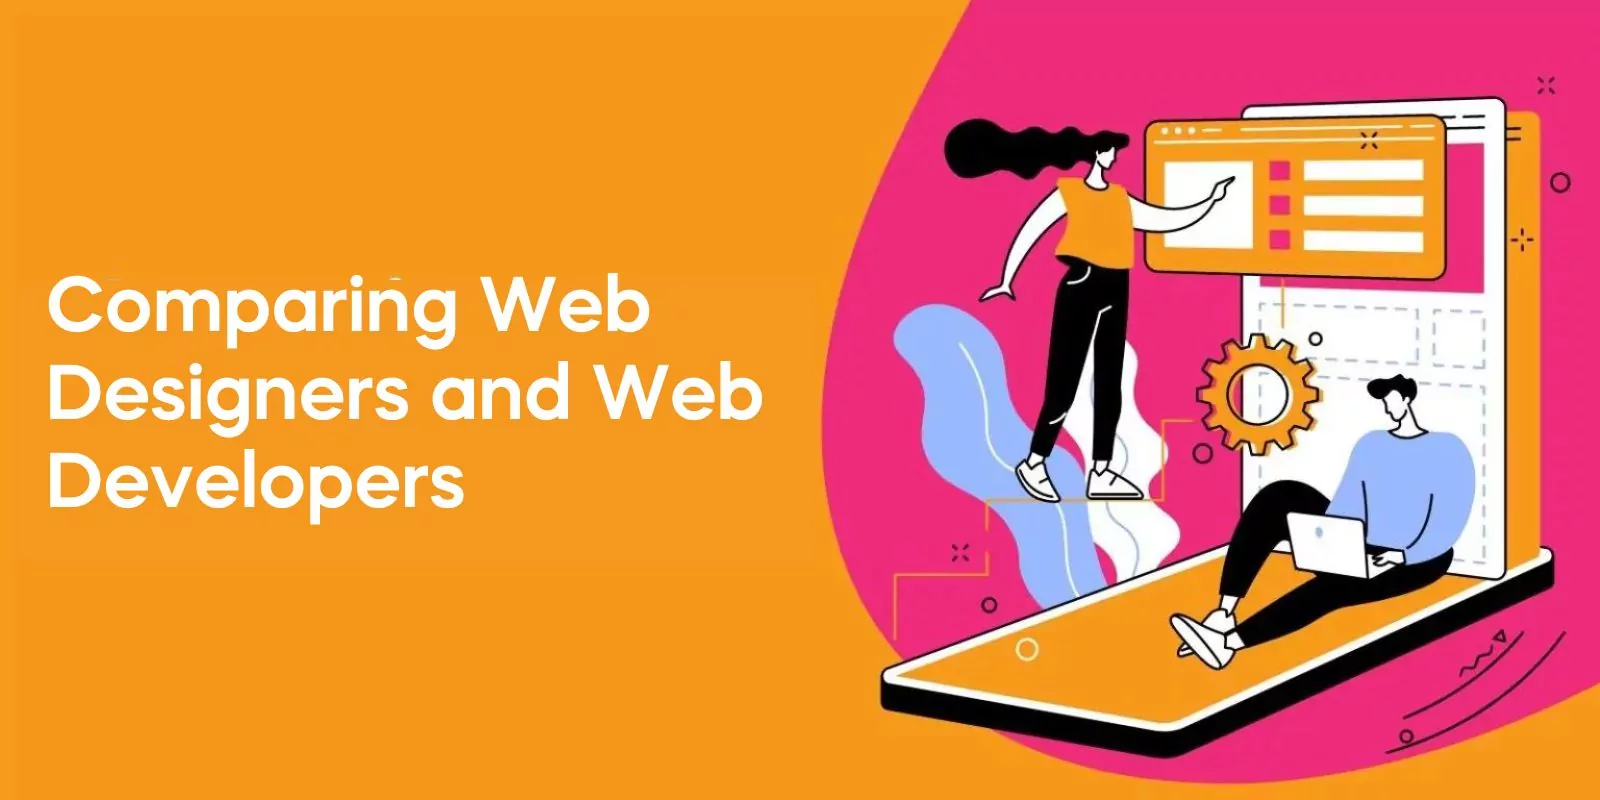 Comparing Web Designers and Web Developers